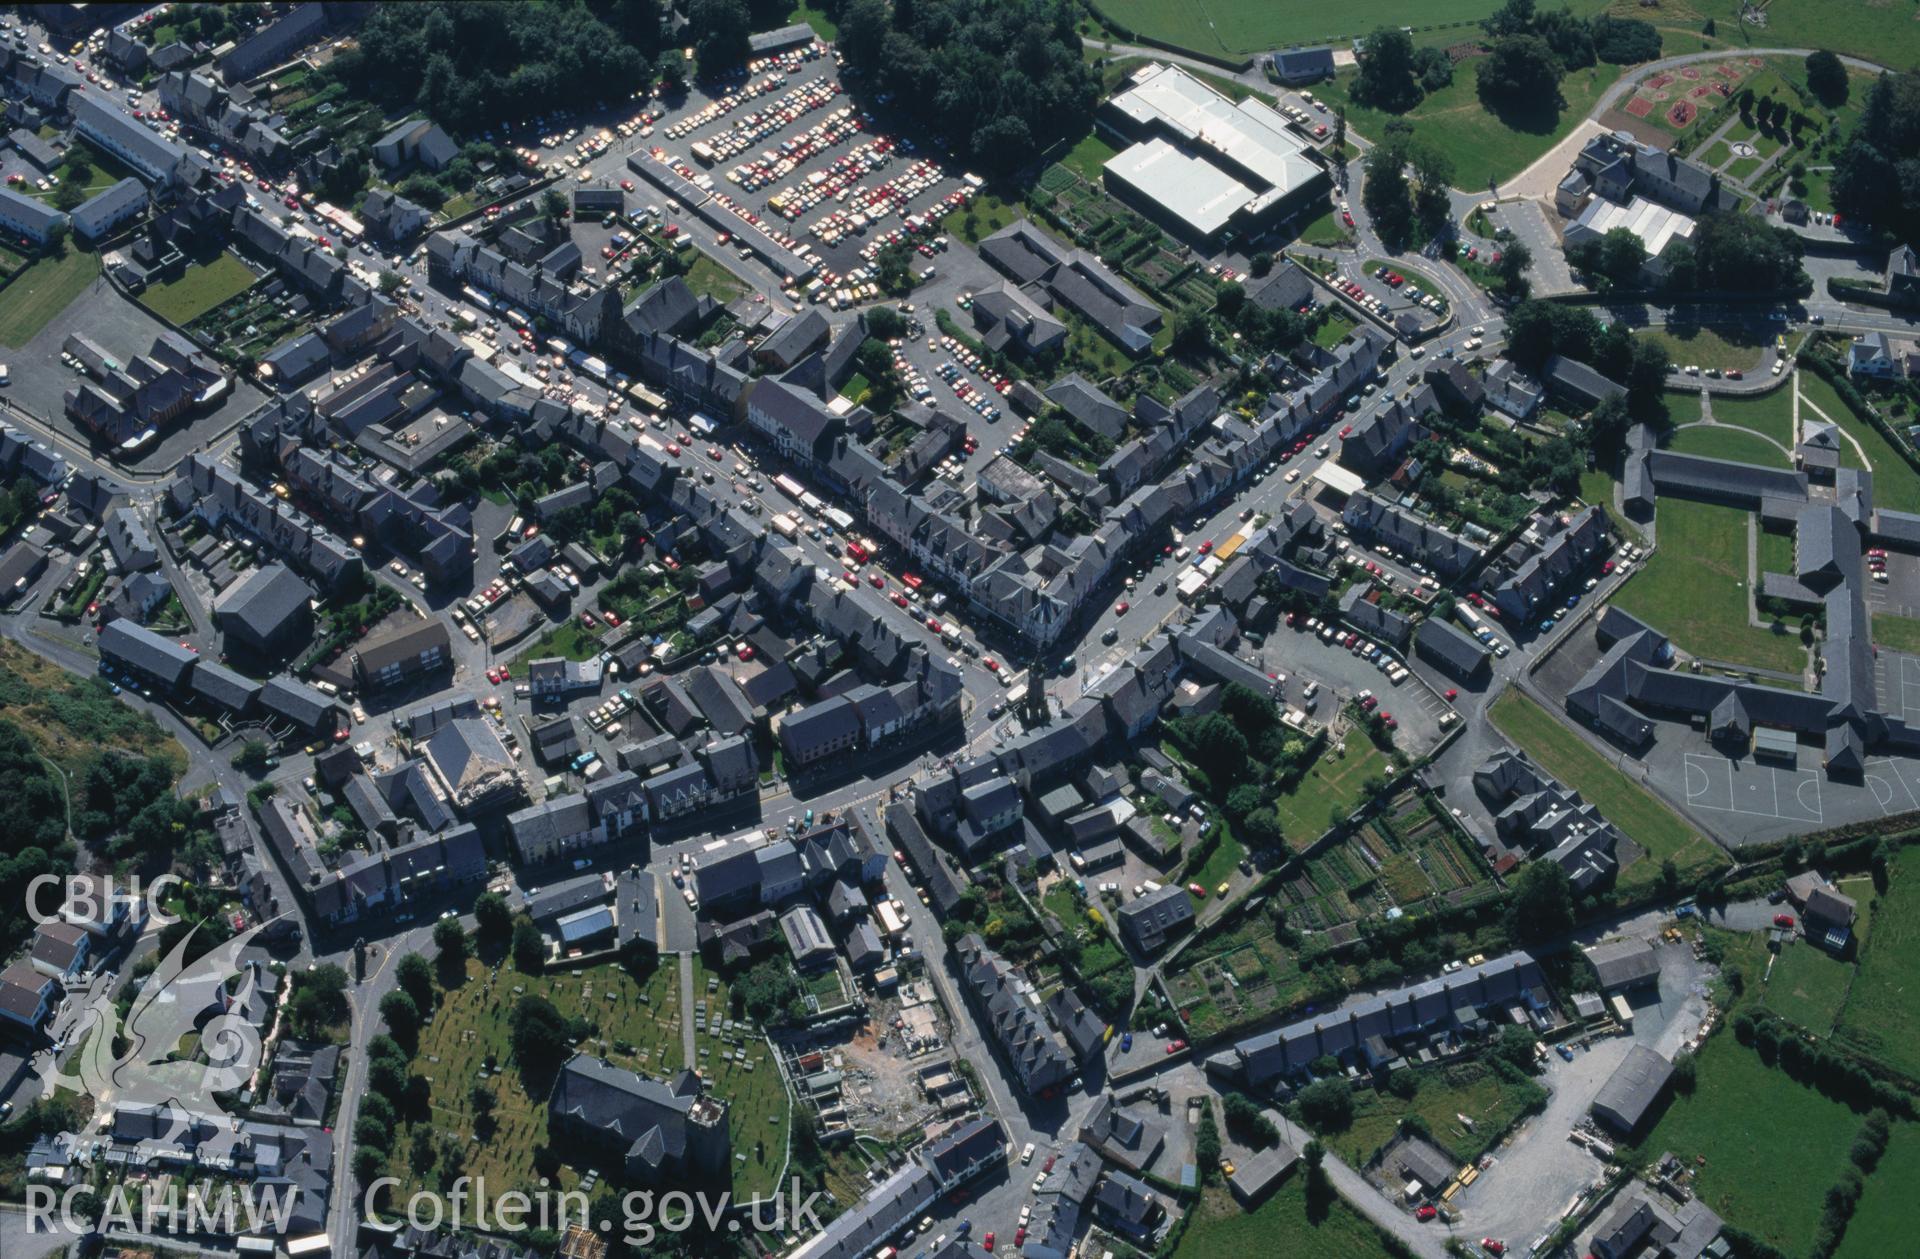 Slide of RCAHMW colour oblique aerial photograph of Machynlleth, taken by C.R. Musson, 9/8/1995.